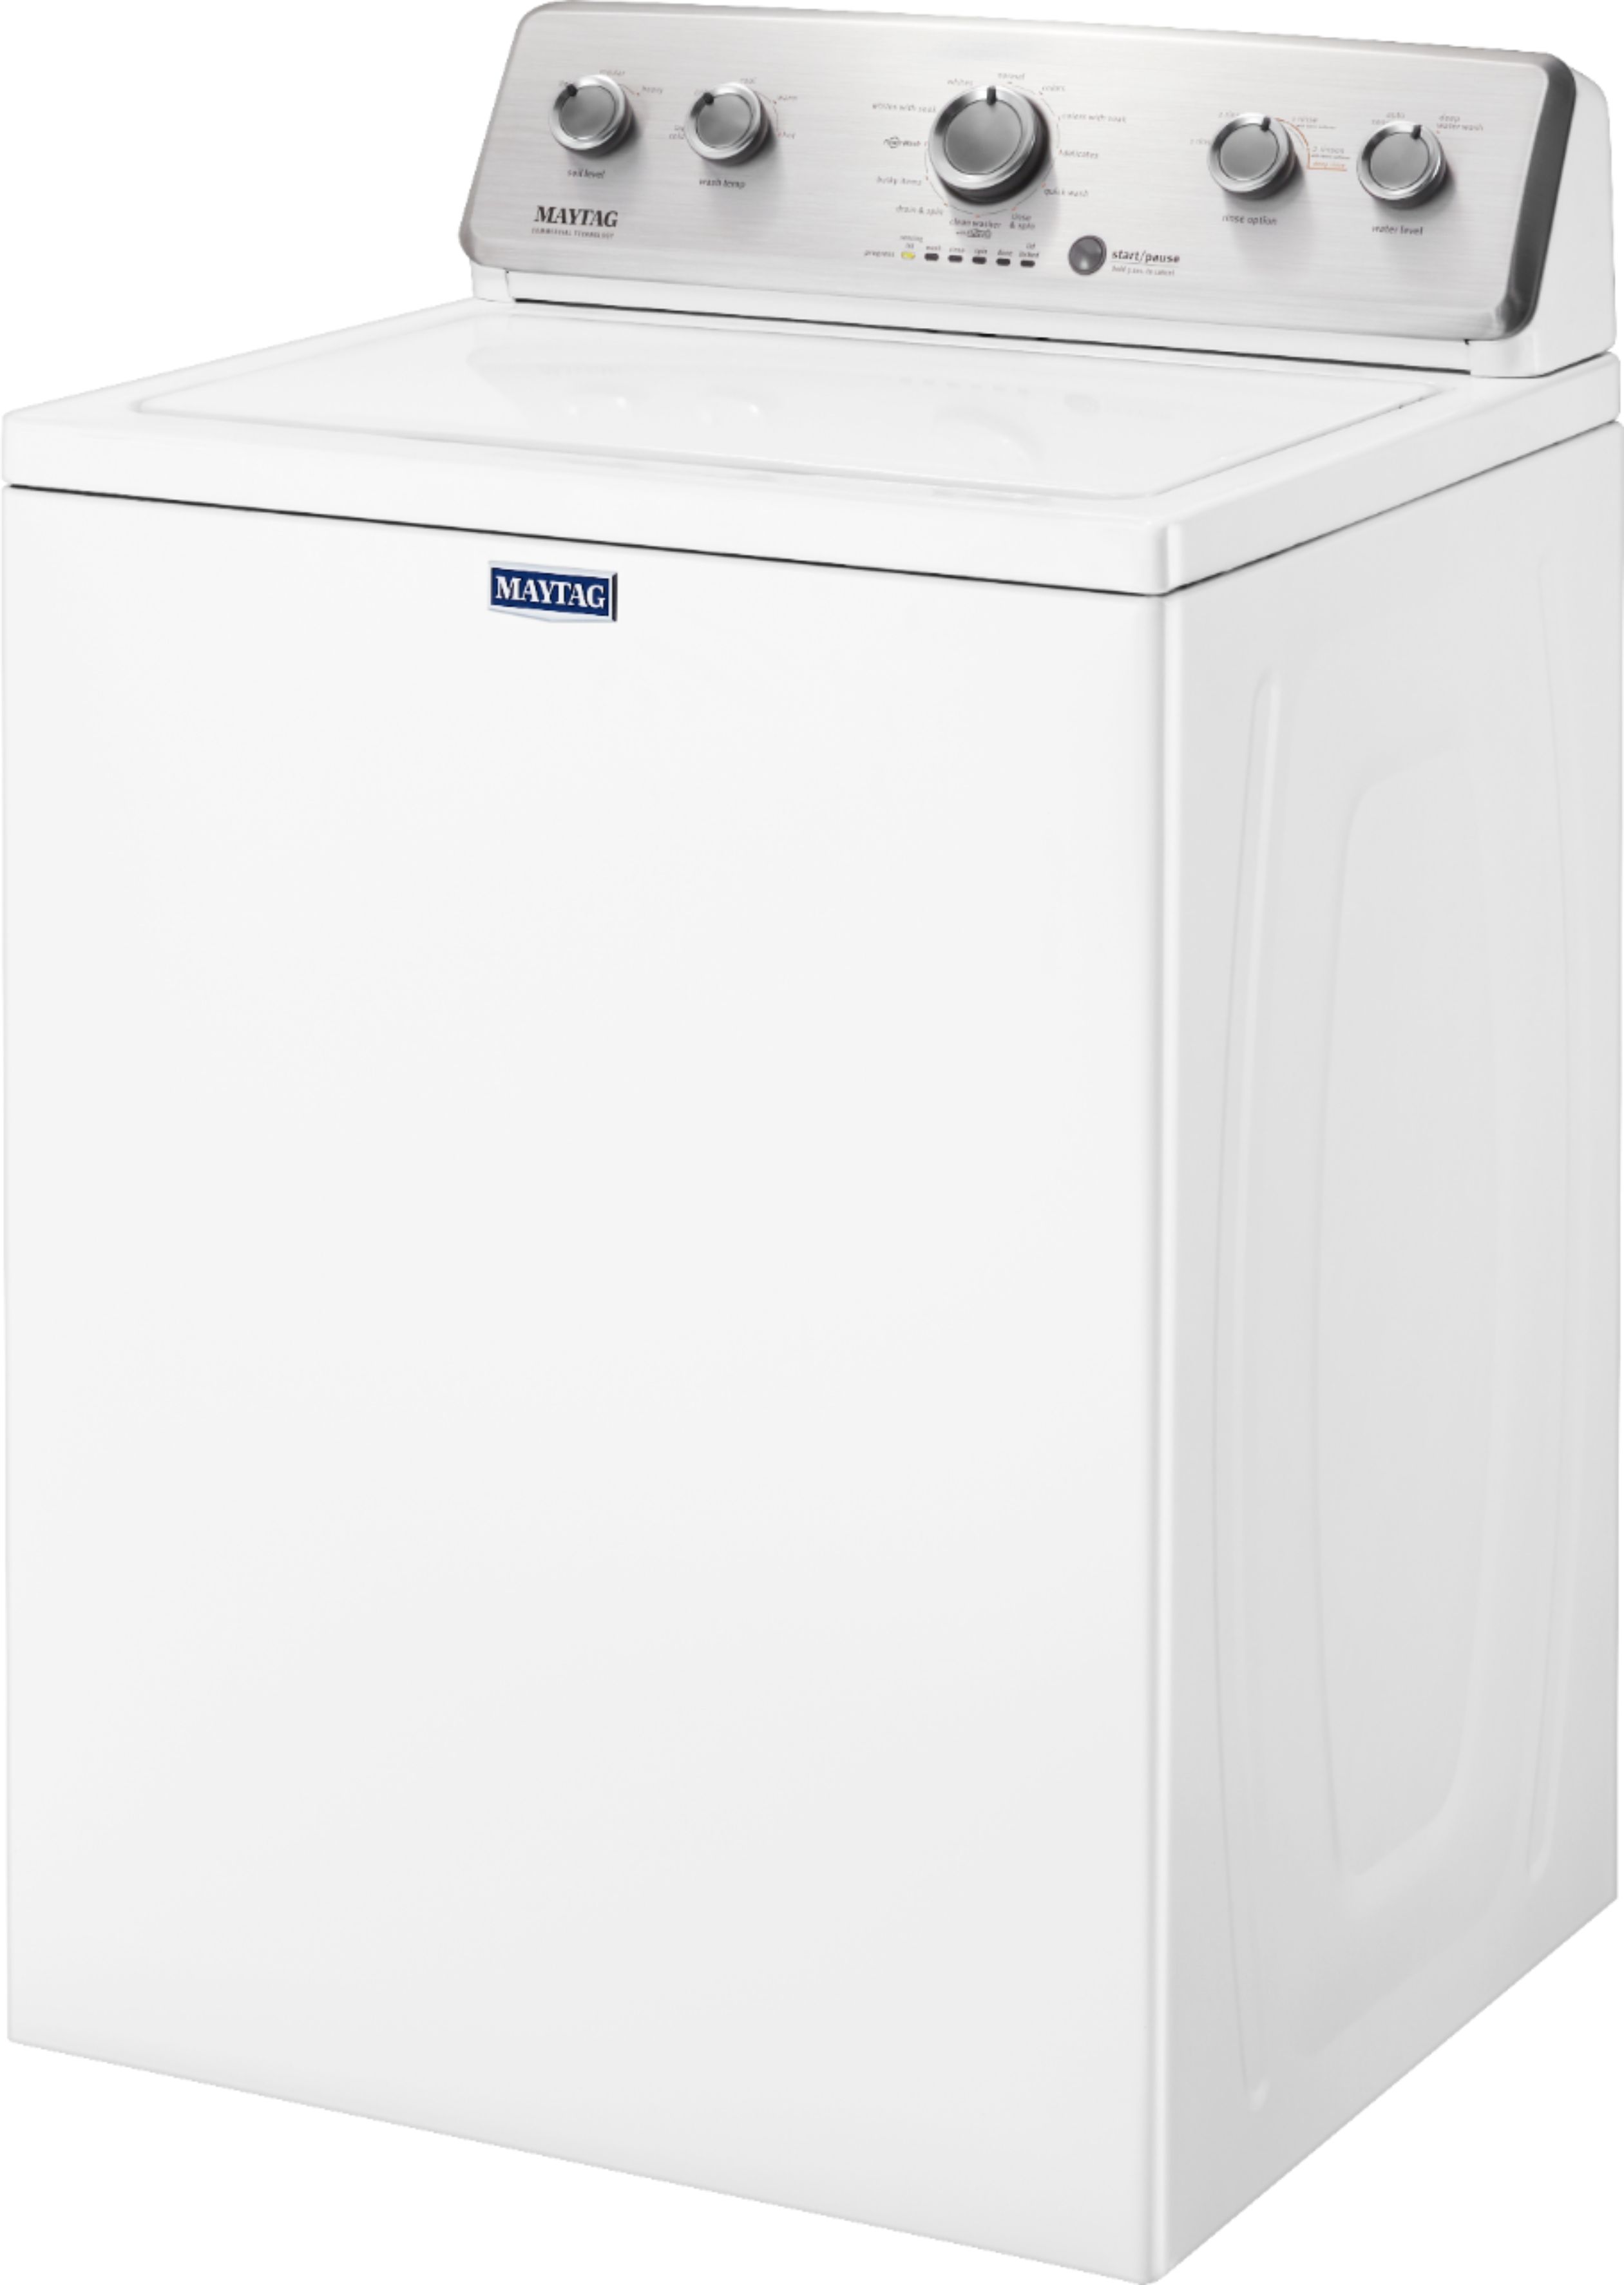 Questions and Answers Maytag 3.8 Cu. Ft. High Efficiency Top Load